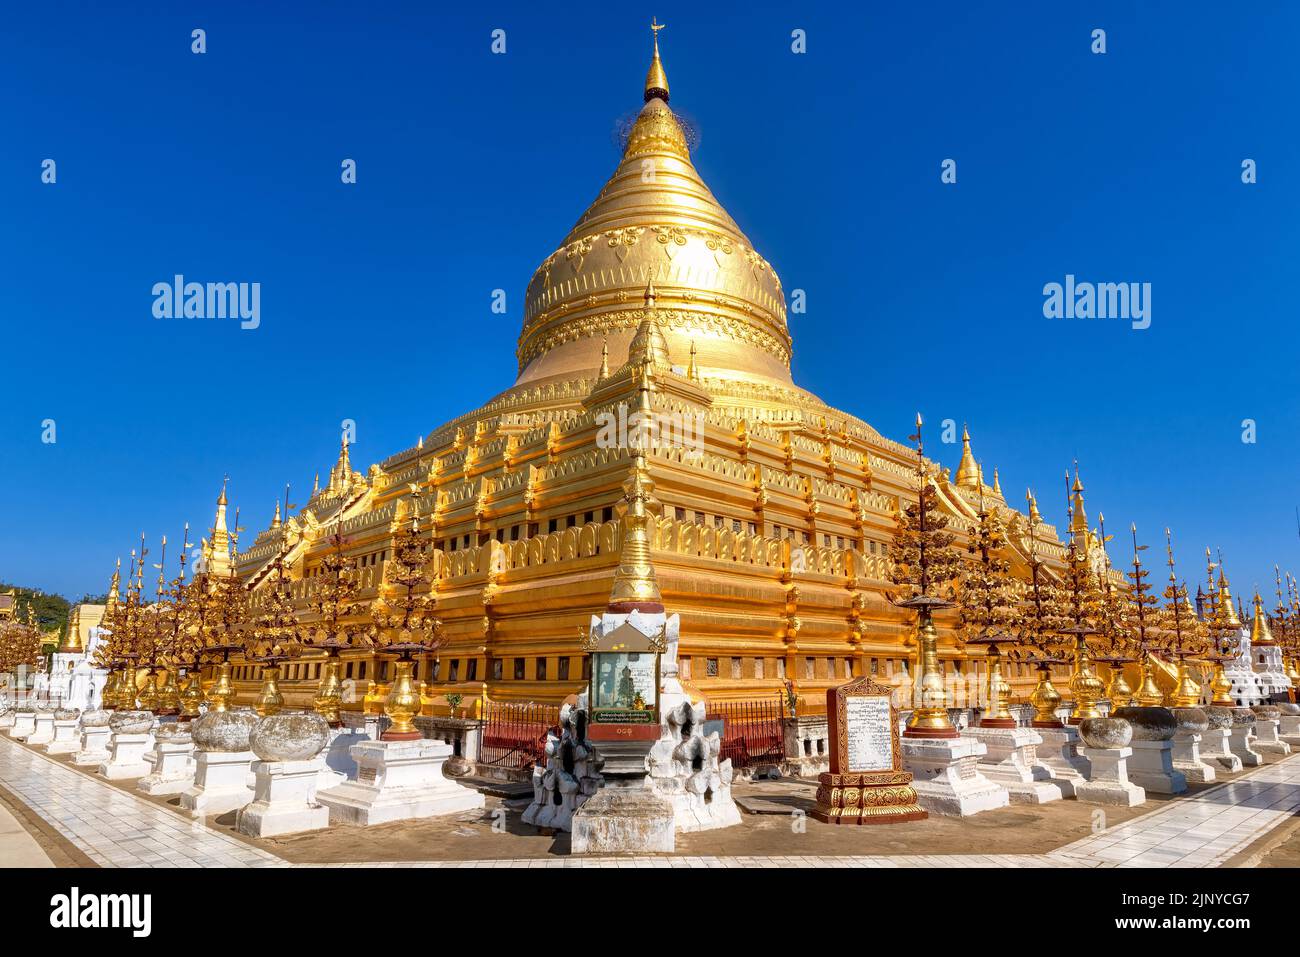 The Shwezigon Pagoda in Bagan, Myanmar. Consists of a circular gold leaf-gilded stupa surrounded by smaller temples and shrines Stock Photo